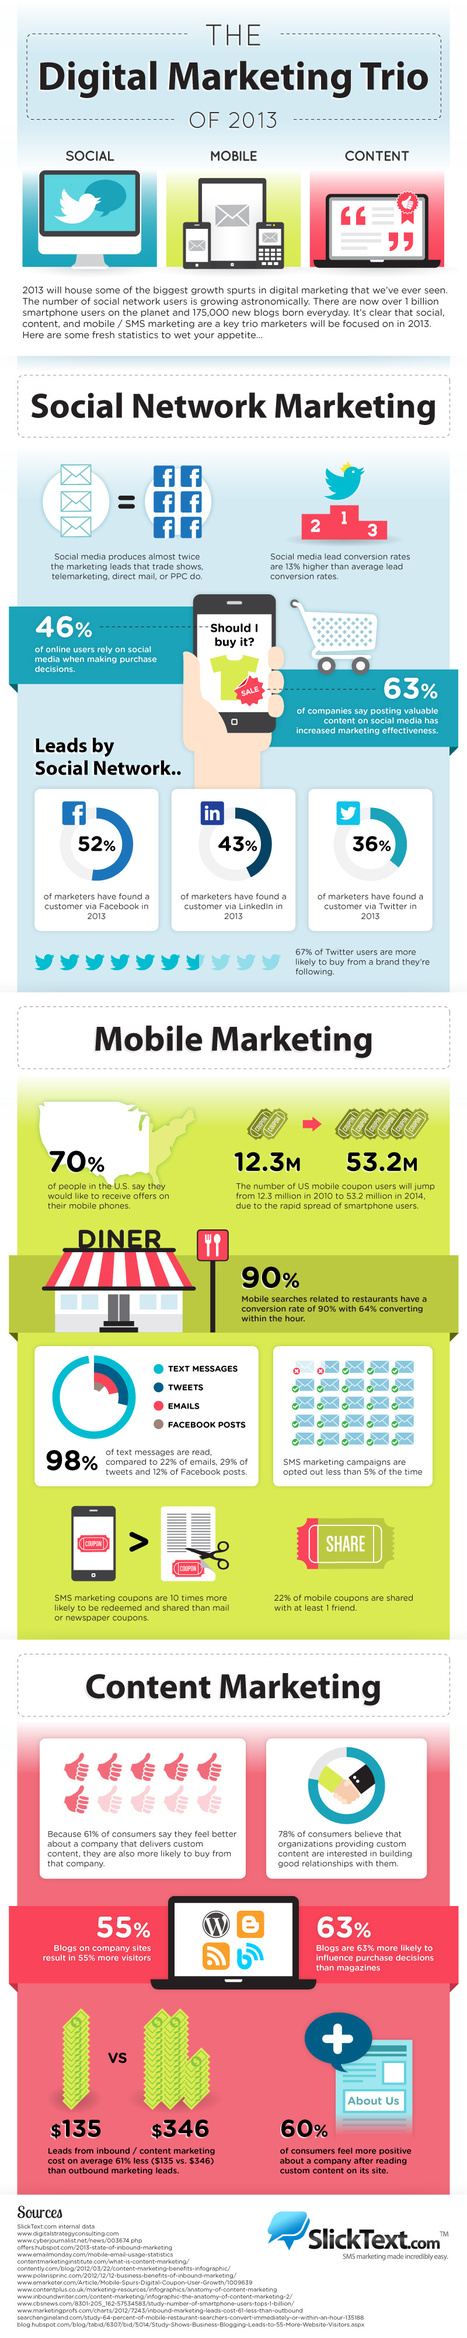 The Digital Marketing Trio Of 2013 [Infographic] | Information Technology & Social Media News | Scoop.it